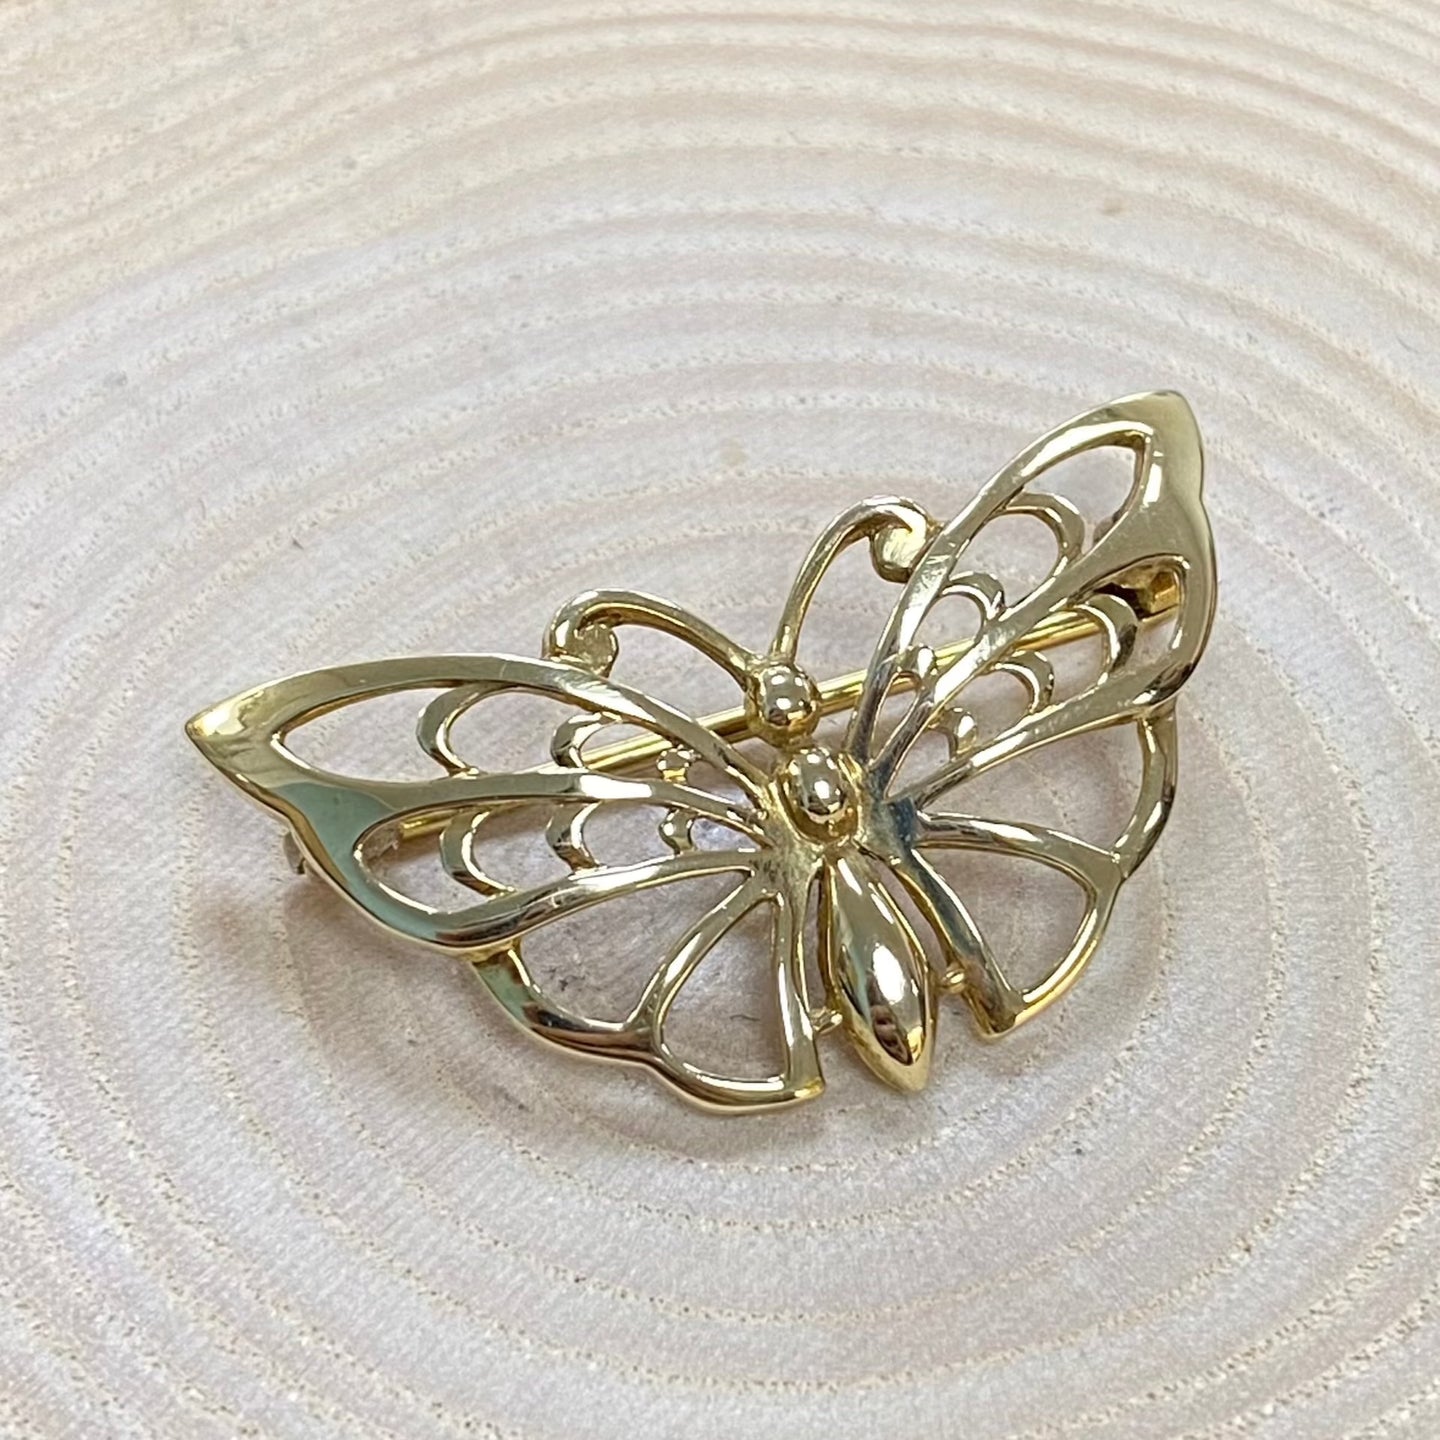 Preloved 9ct Yellow Gold Butterfly Brooch